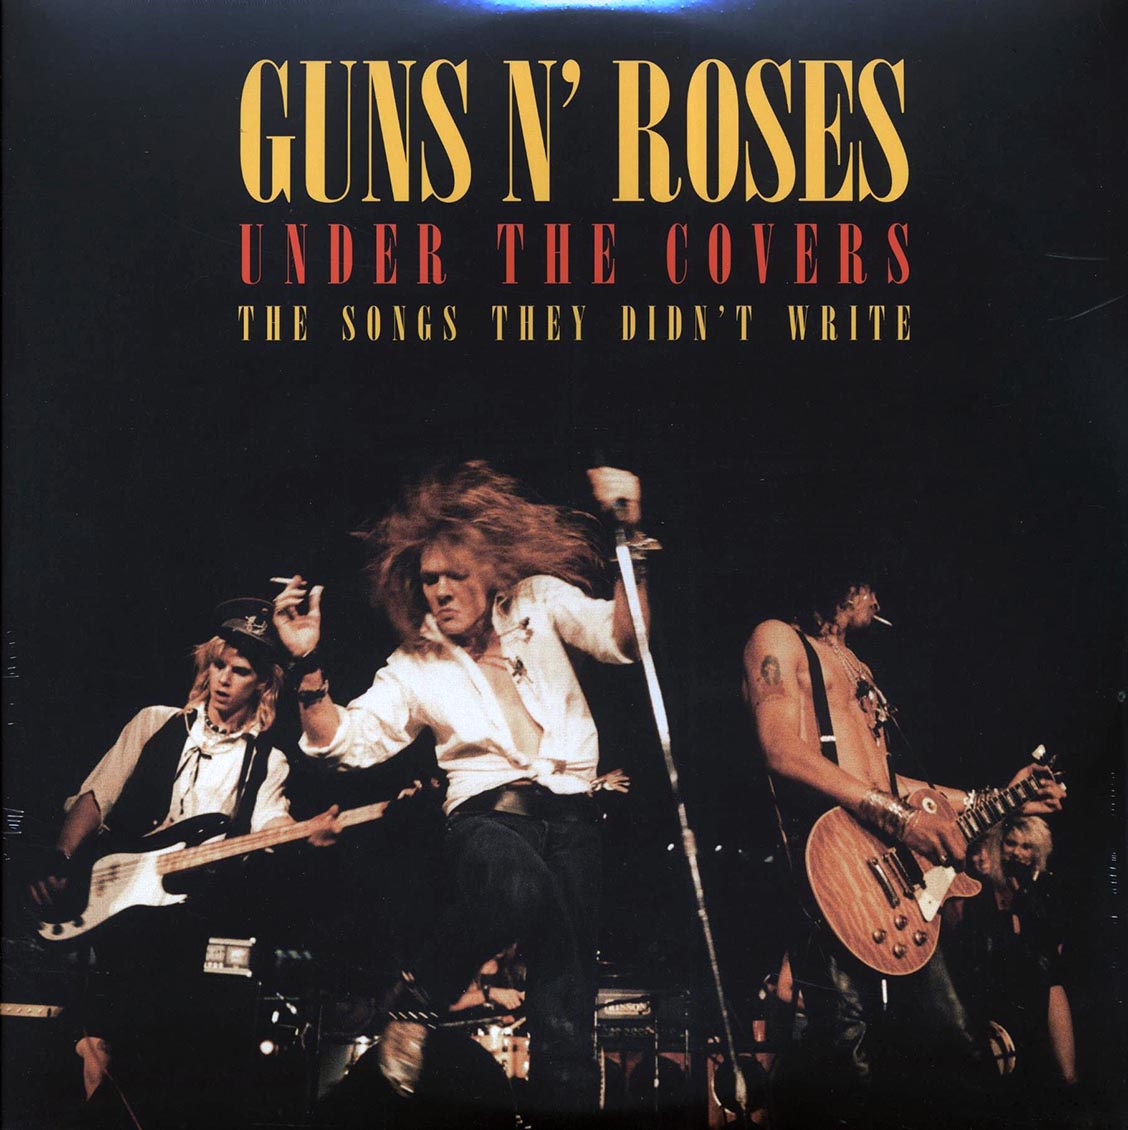 Guns N' Roses - Under The Covers: The Songs They Didn't Write